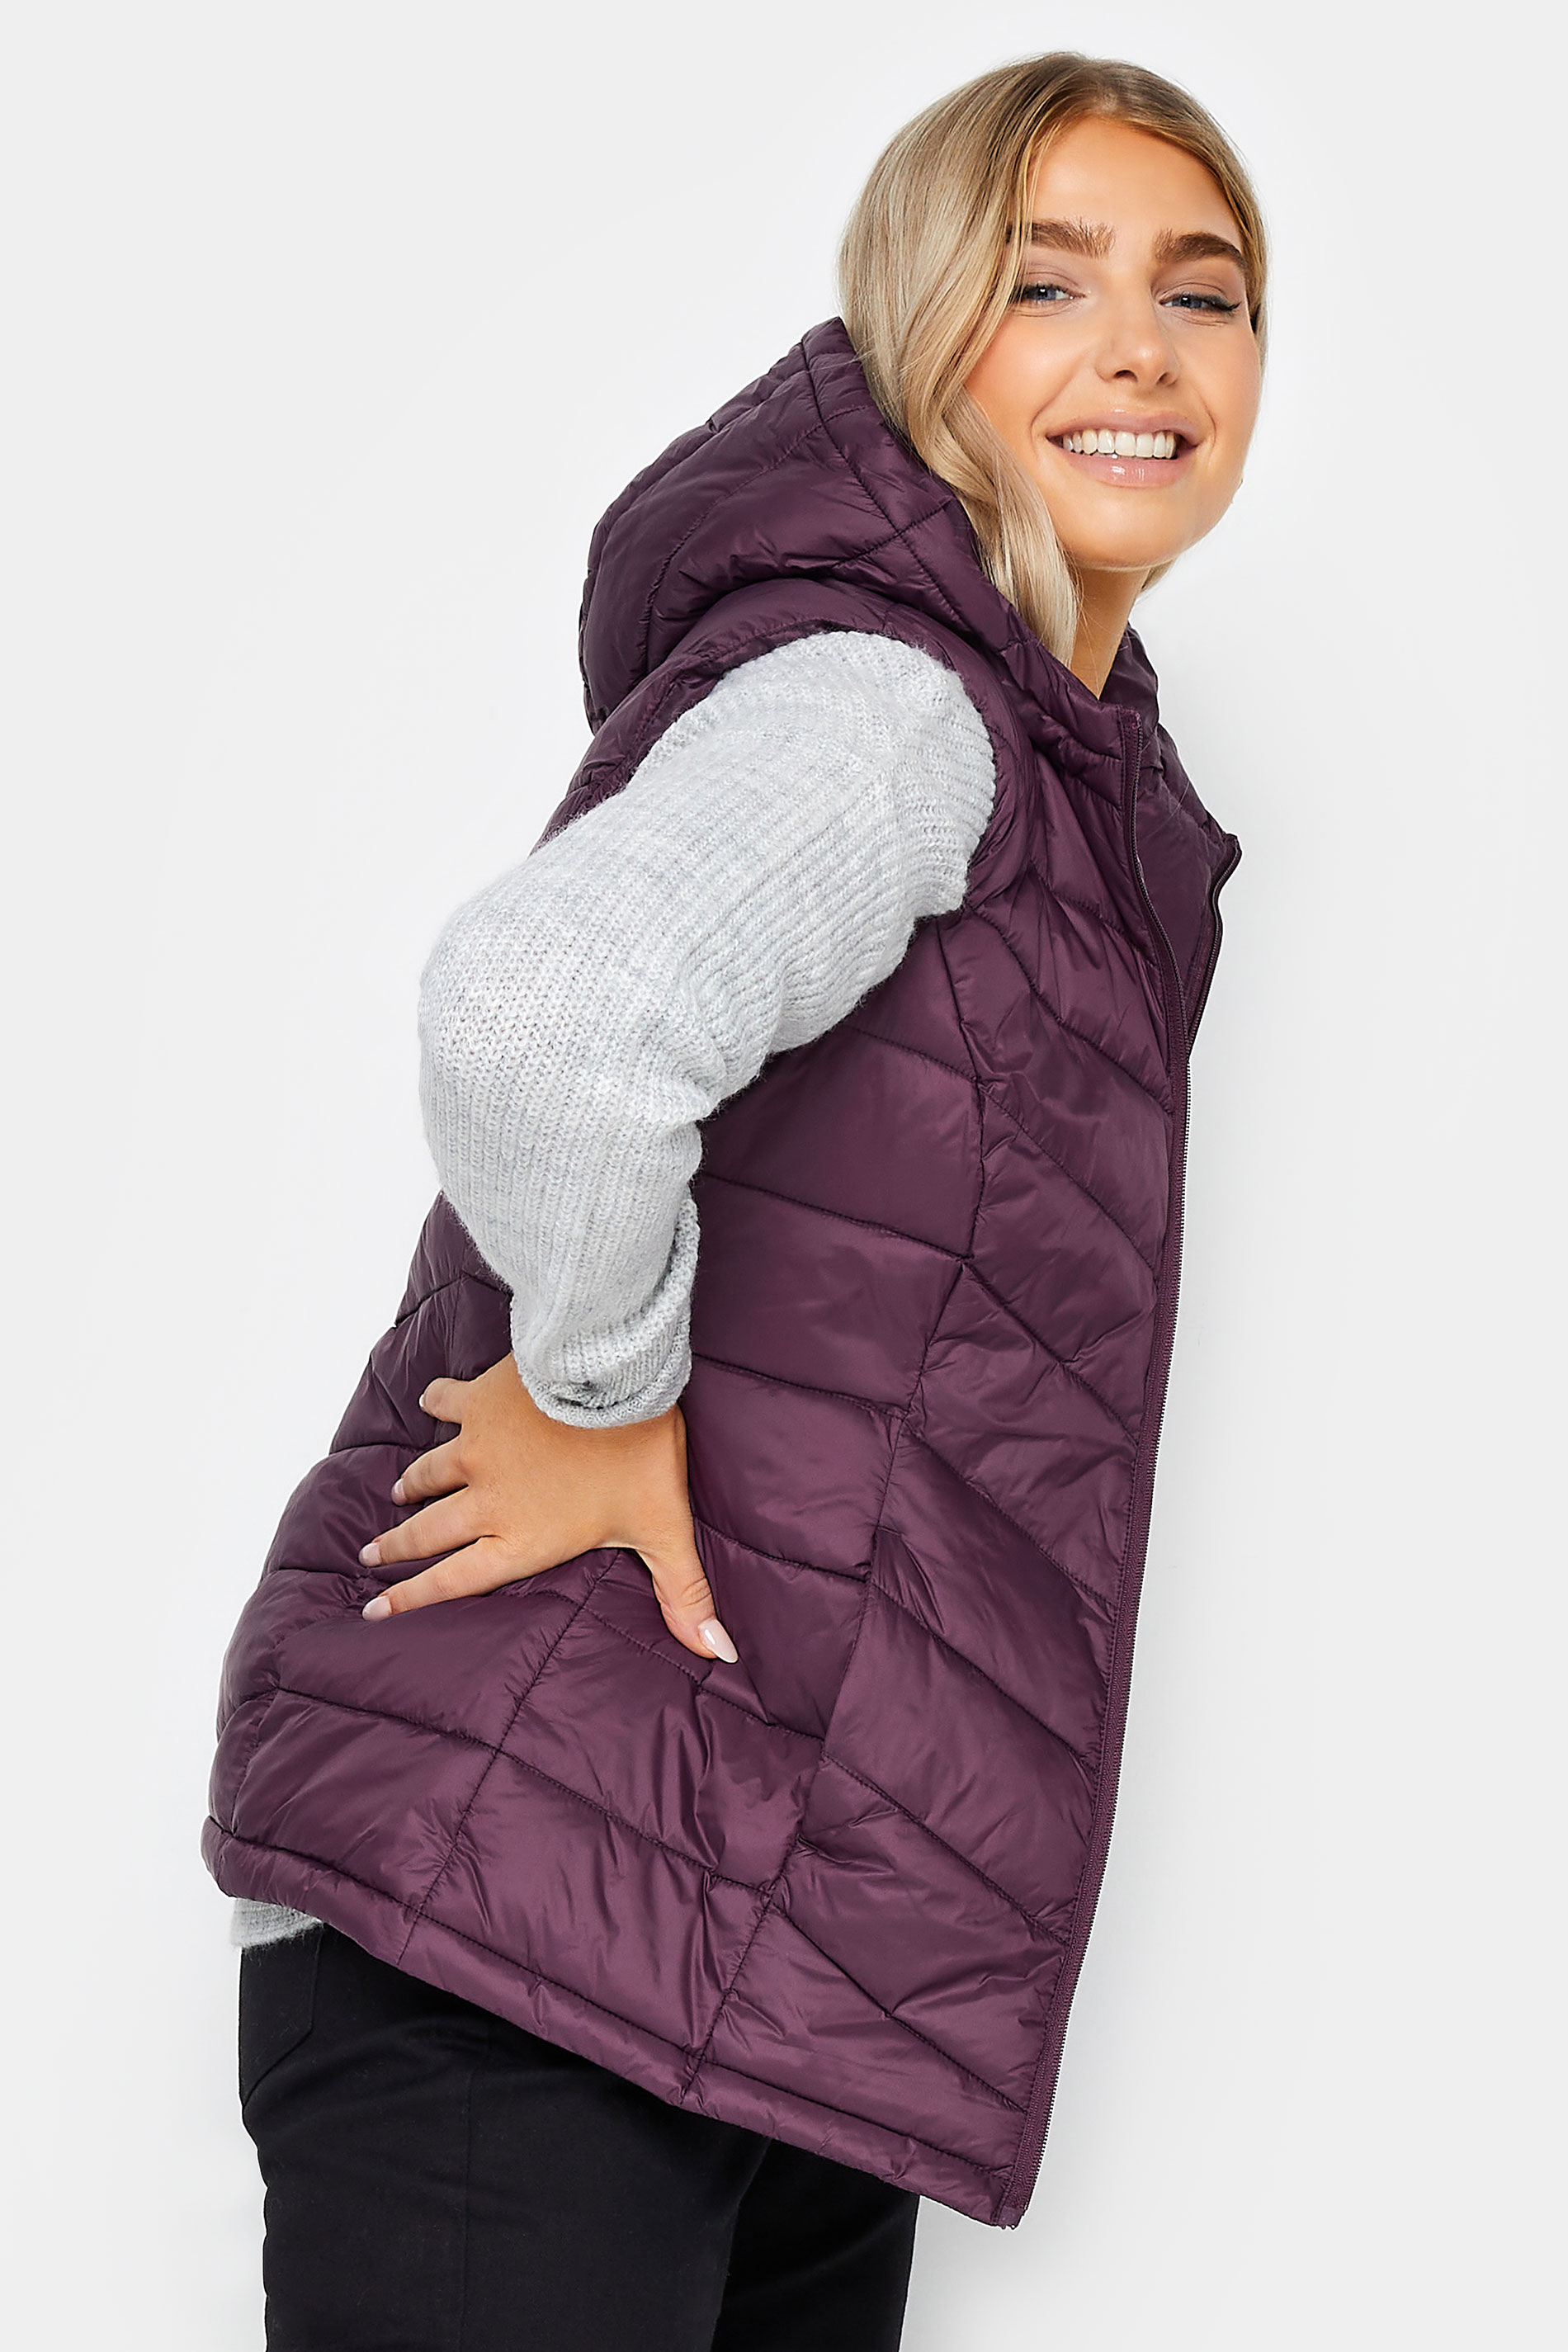 M&Co Purple Quilted Gilet | M&Co 2